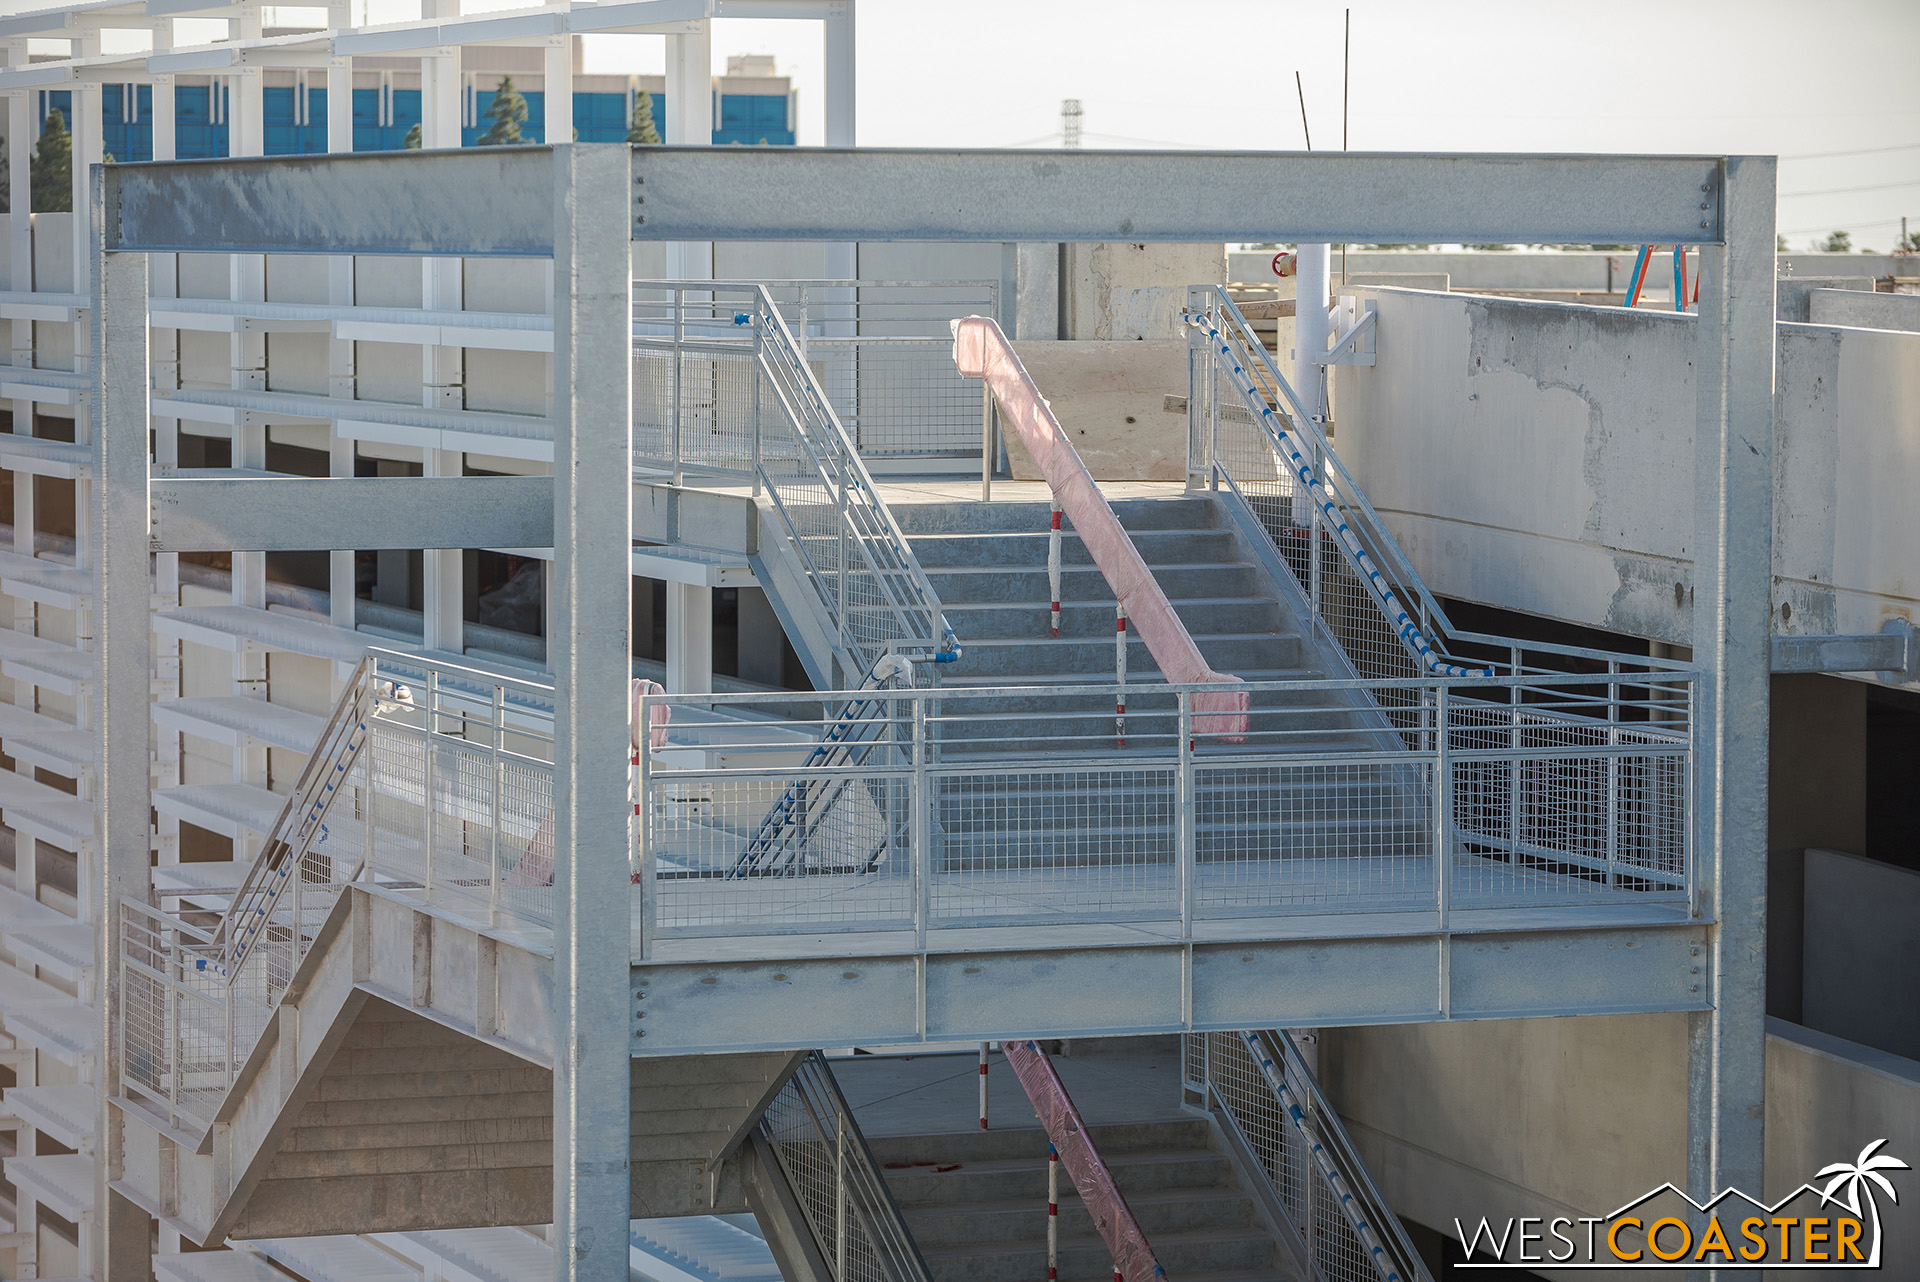  Another thing I noticed… the stairs over here are twice as wide as the typical stairs at the current parking structure! 